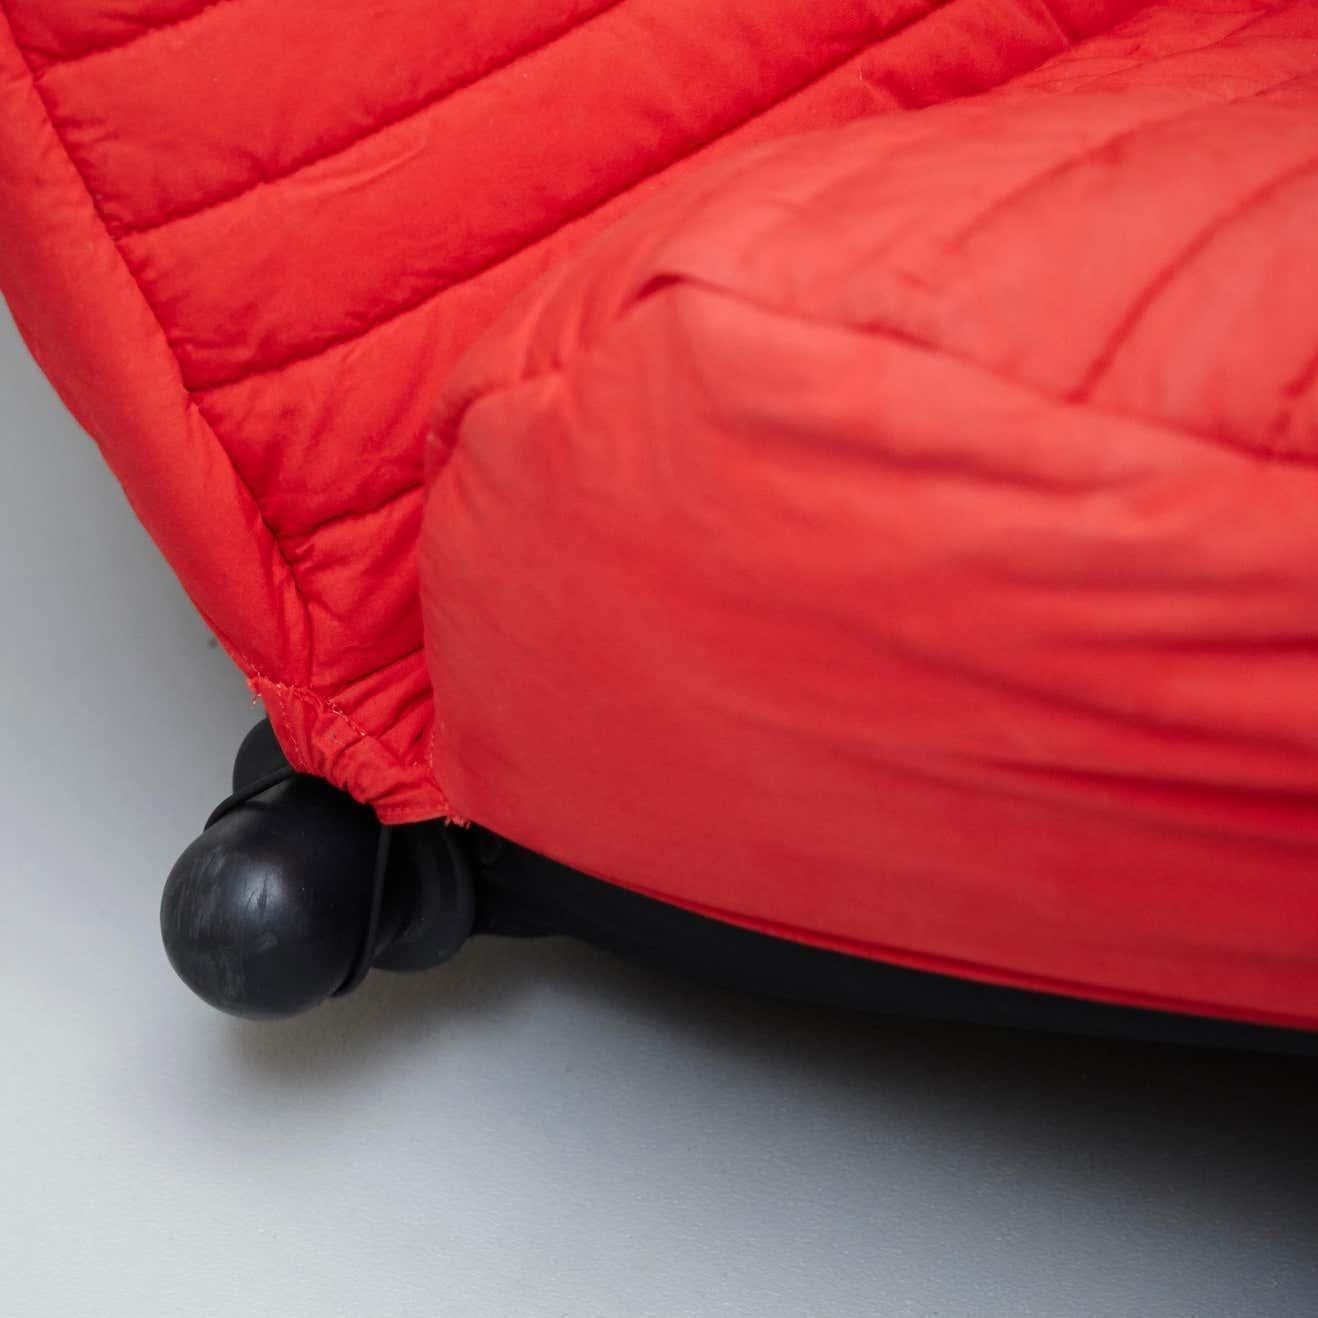 Toshiyuki Kita Wink 111 Armchair in Black and Red by Cassina, circa 1980 For Sale 8